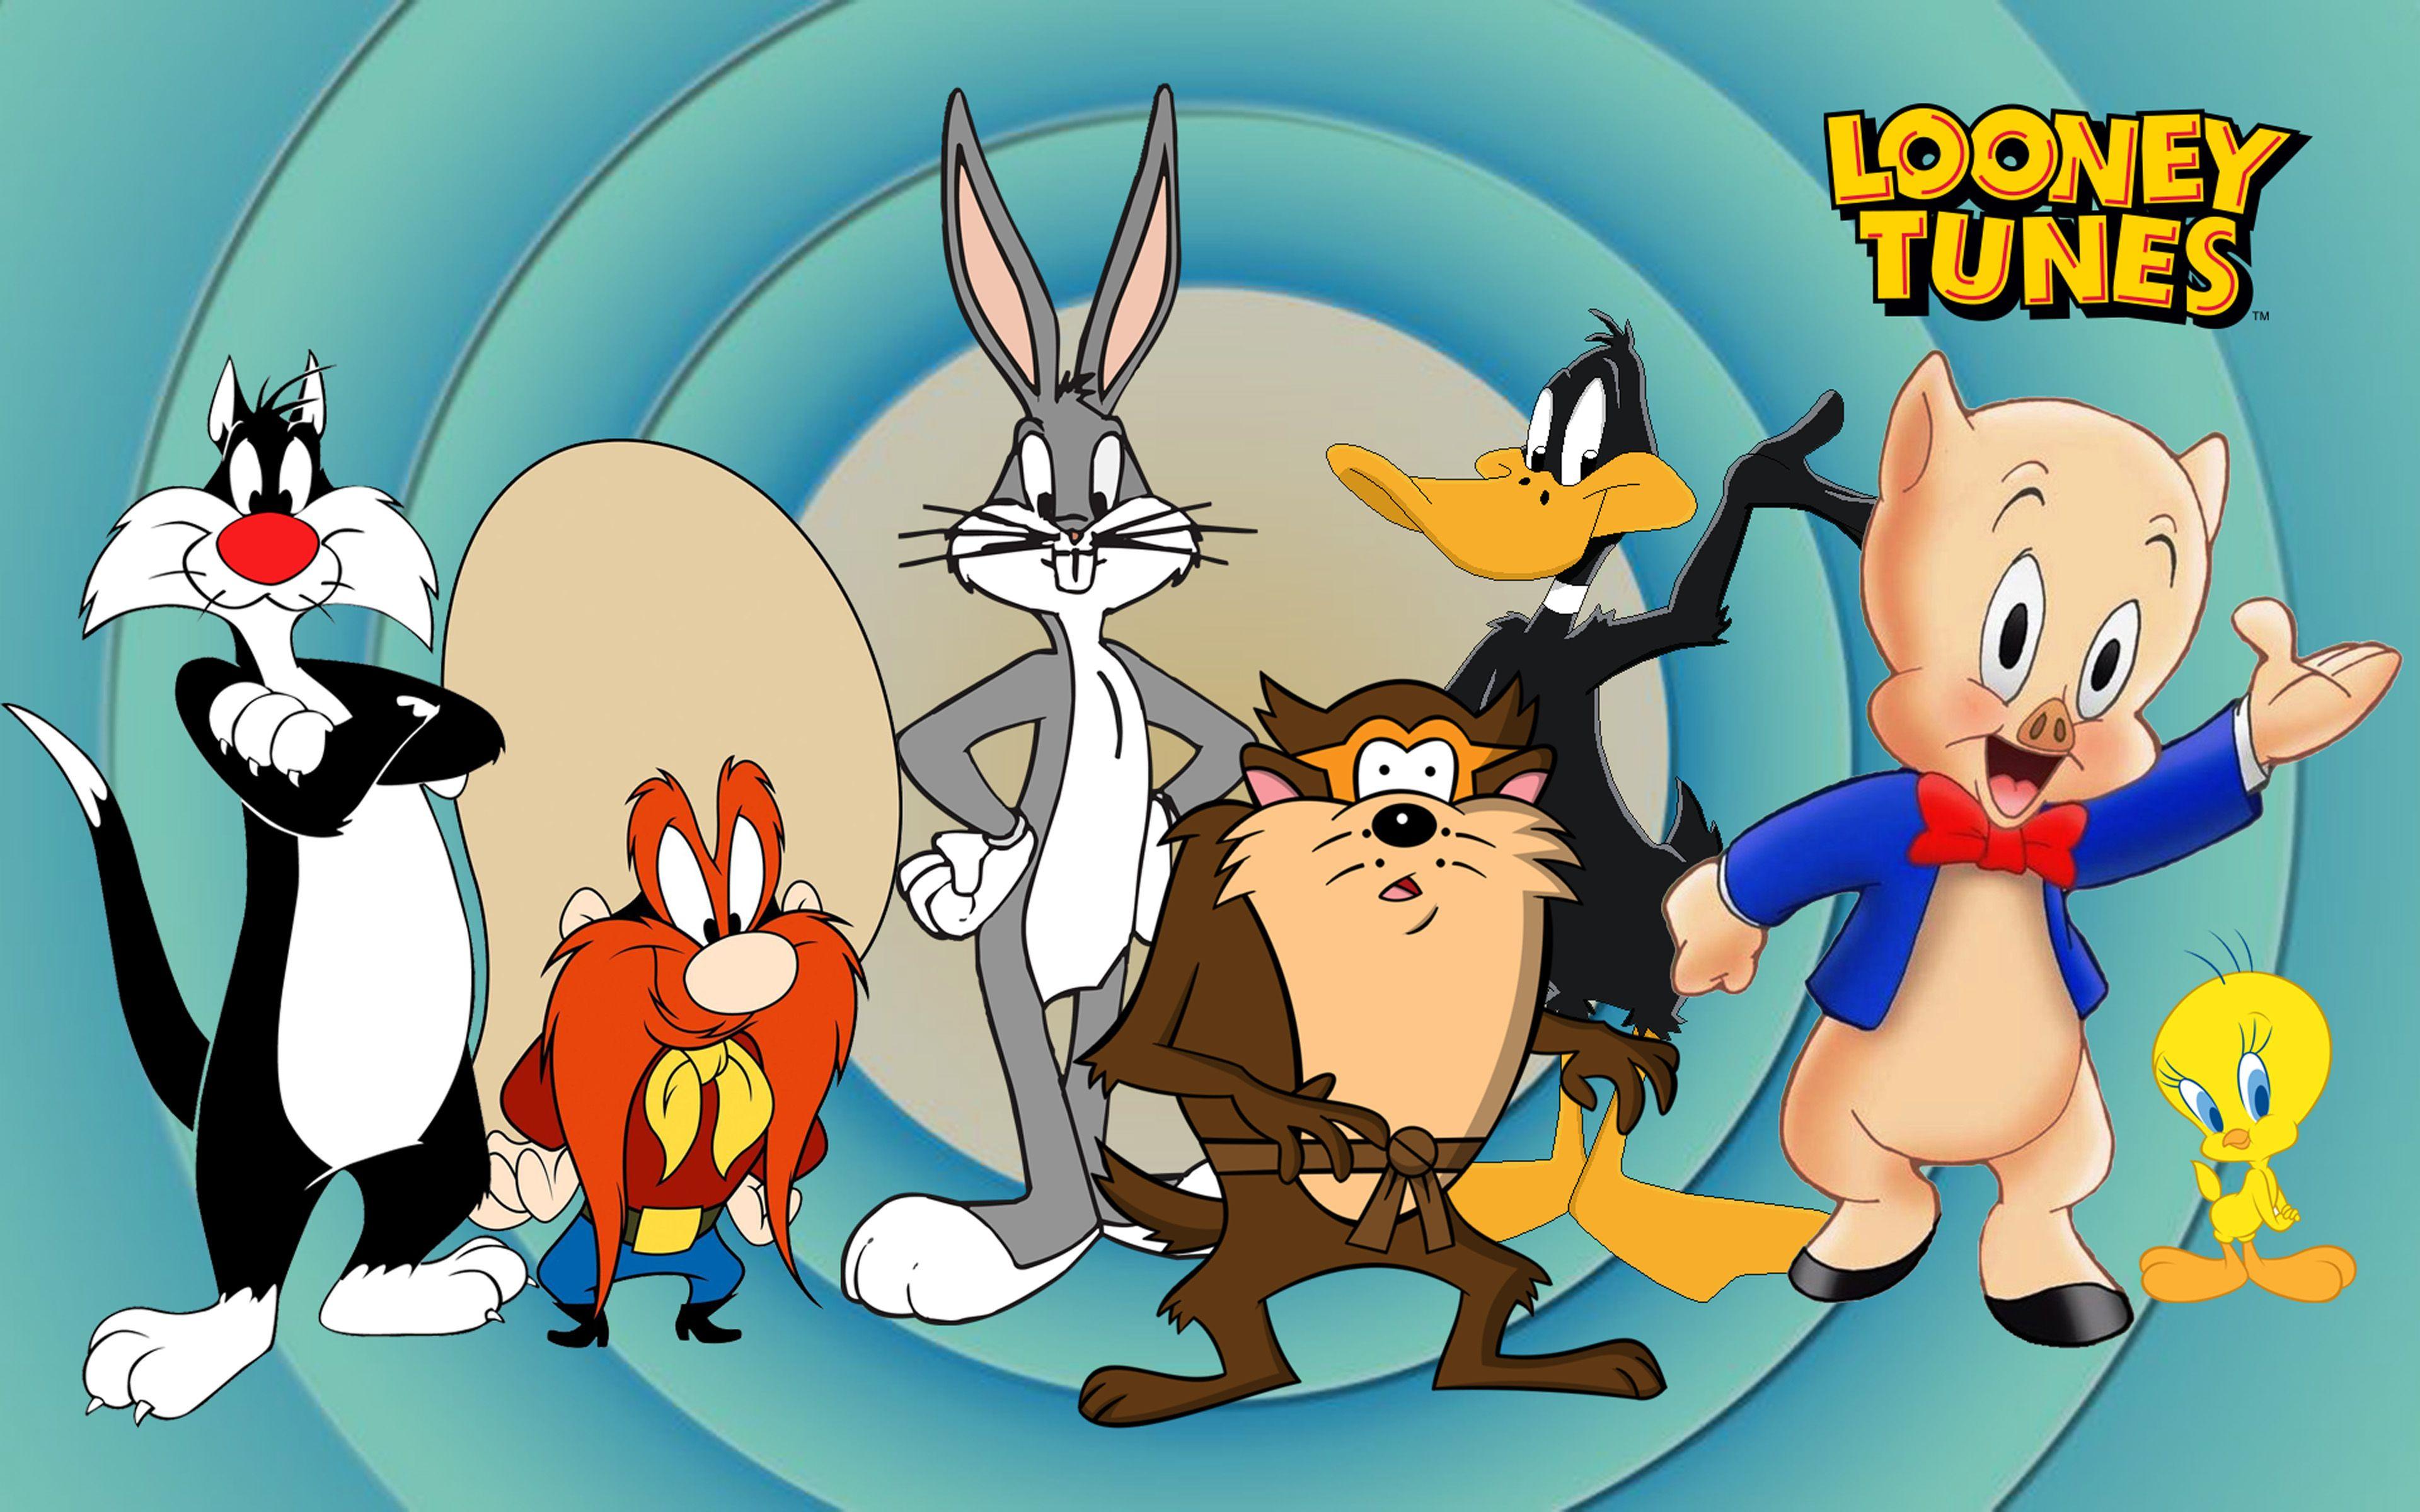 Photos Of Looney Tunes Character Sylvester The Cat Yosemite Sam